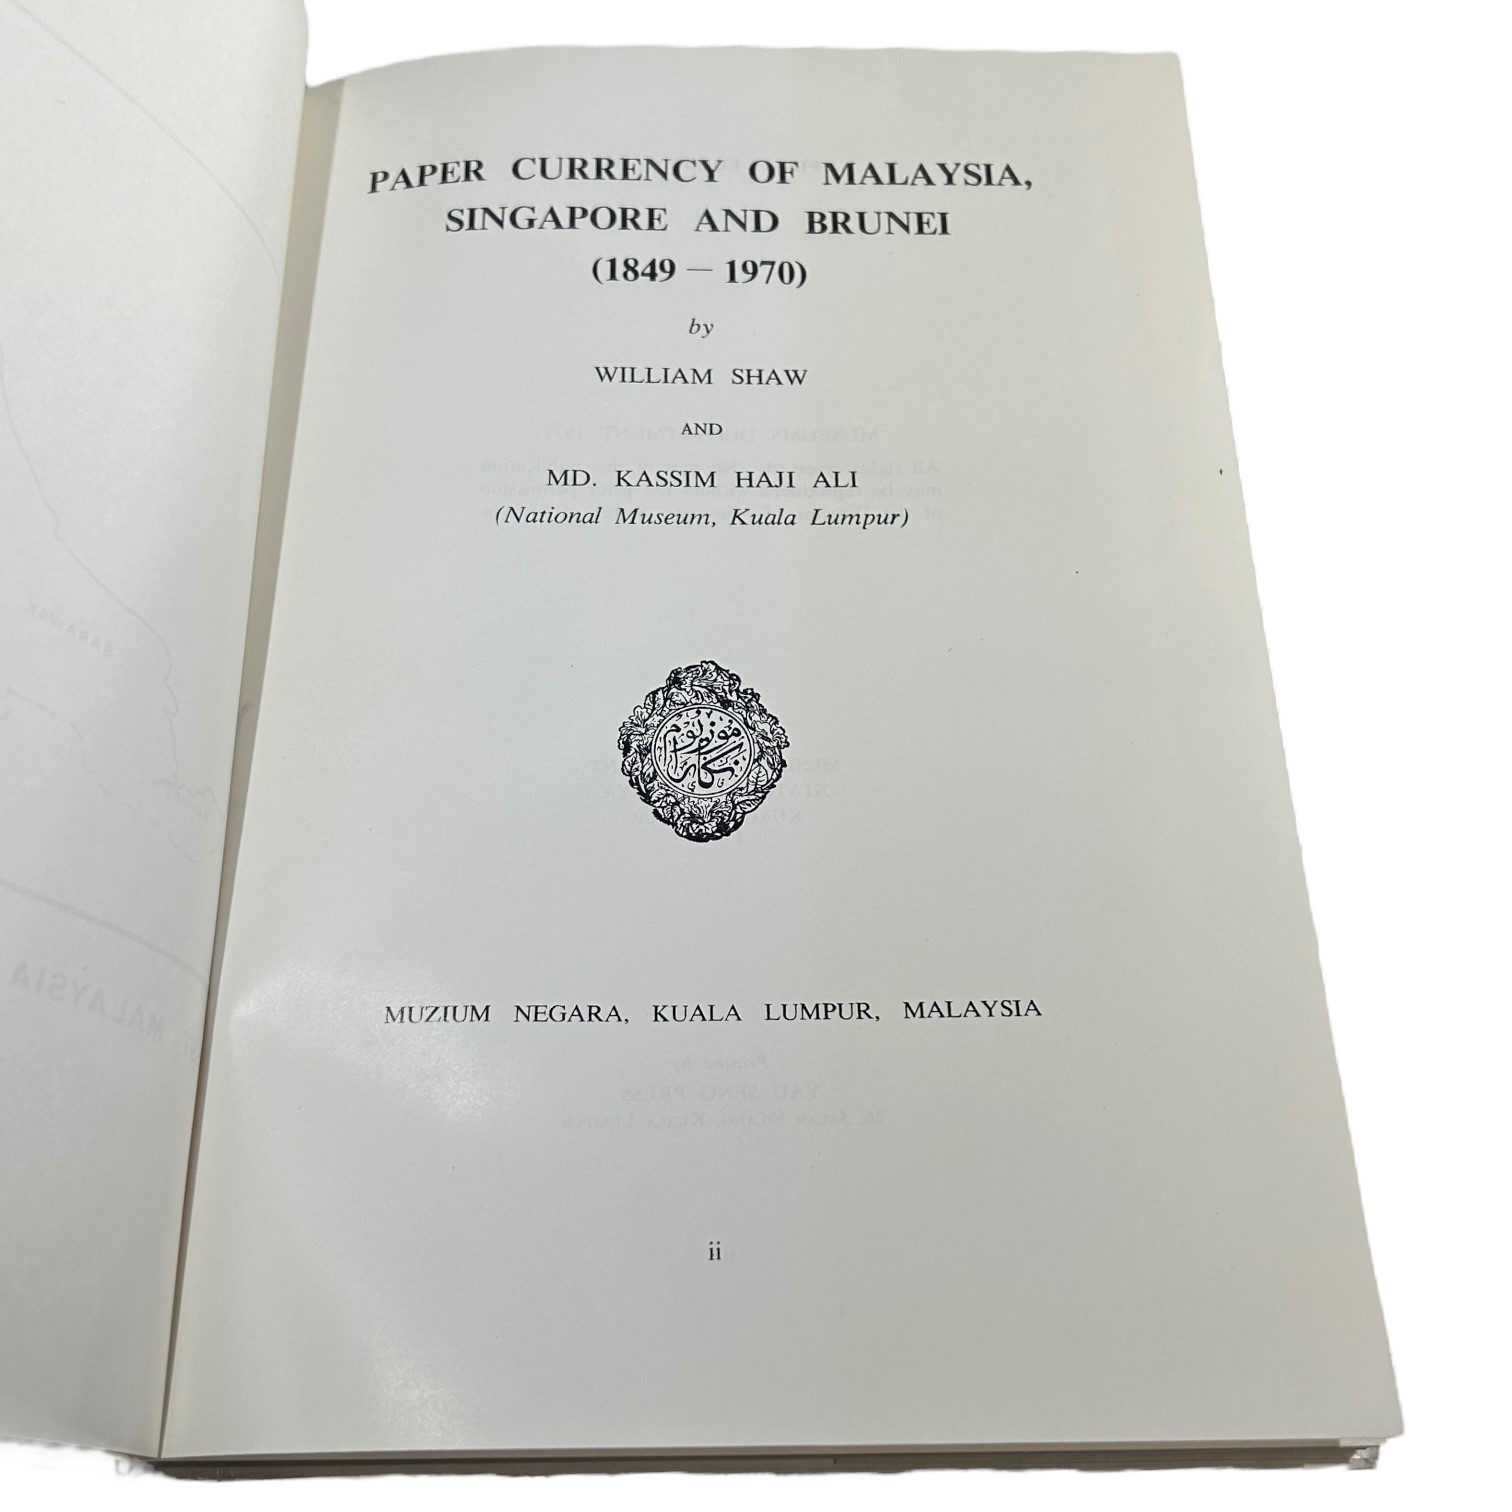 PAPER CURRENCY OF MALAYSIA, SINGAPORE AND BRUNEI, 1849 - 1970, BOOK BY WILLIAM SHAW AND MOHD. KASSIM - Image 2 of 4